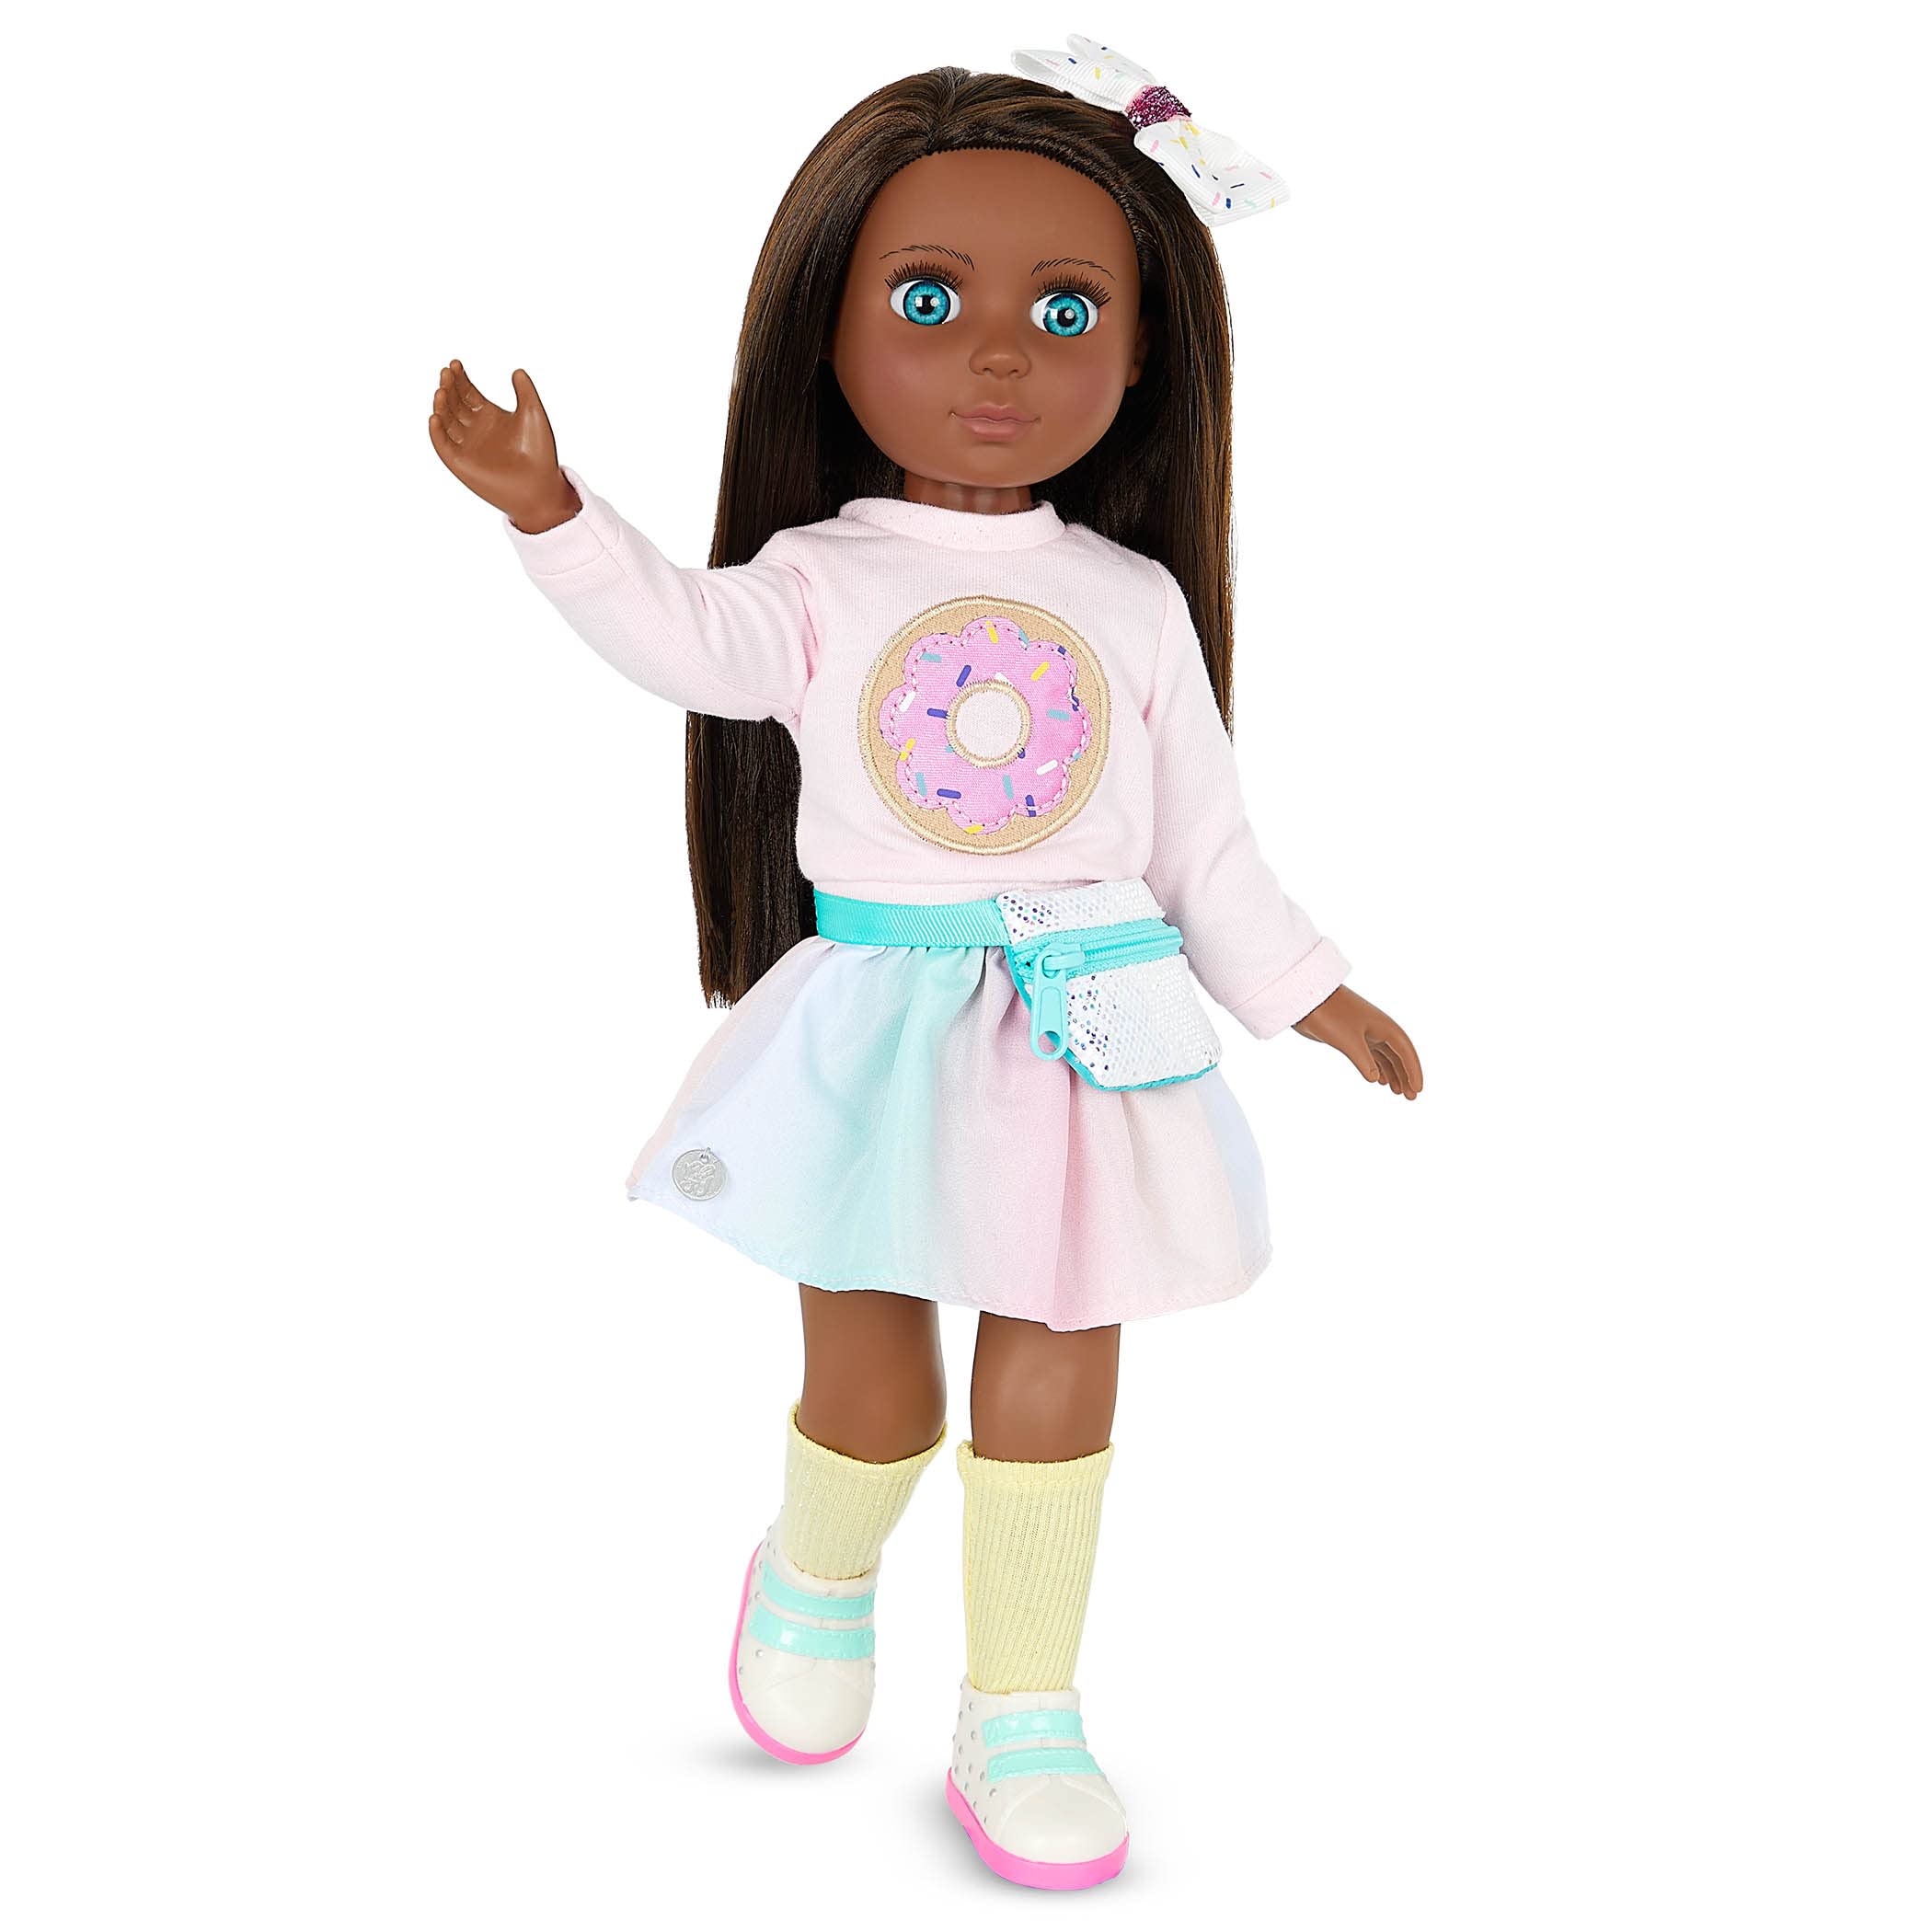 Glitter Girls – Outfit for 14-inch Dolls – Colorful Doll Clothes & Sunglasses – Pink Sweater, Skirt, Fanny Pack & More – Toys for Kids 3 Years+ – Sweet Sprinkles